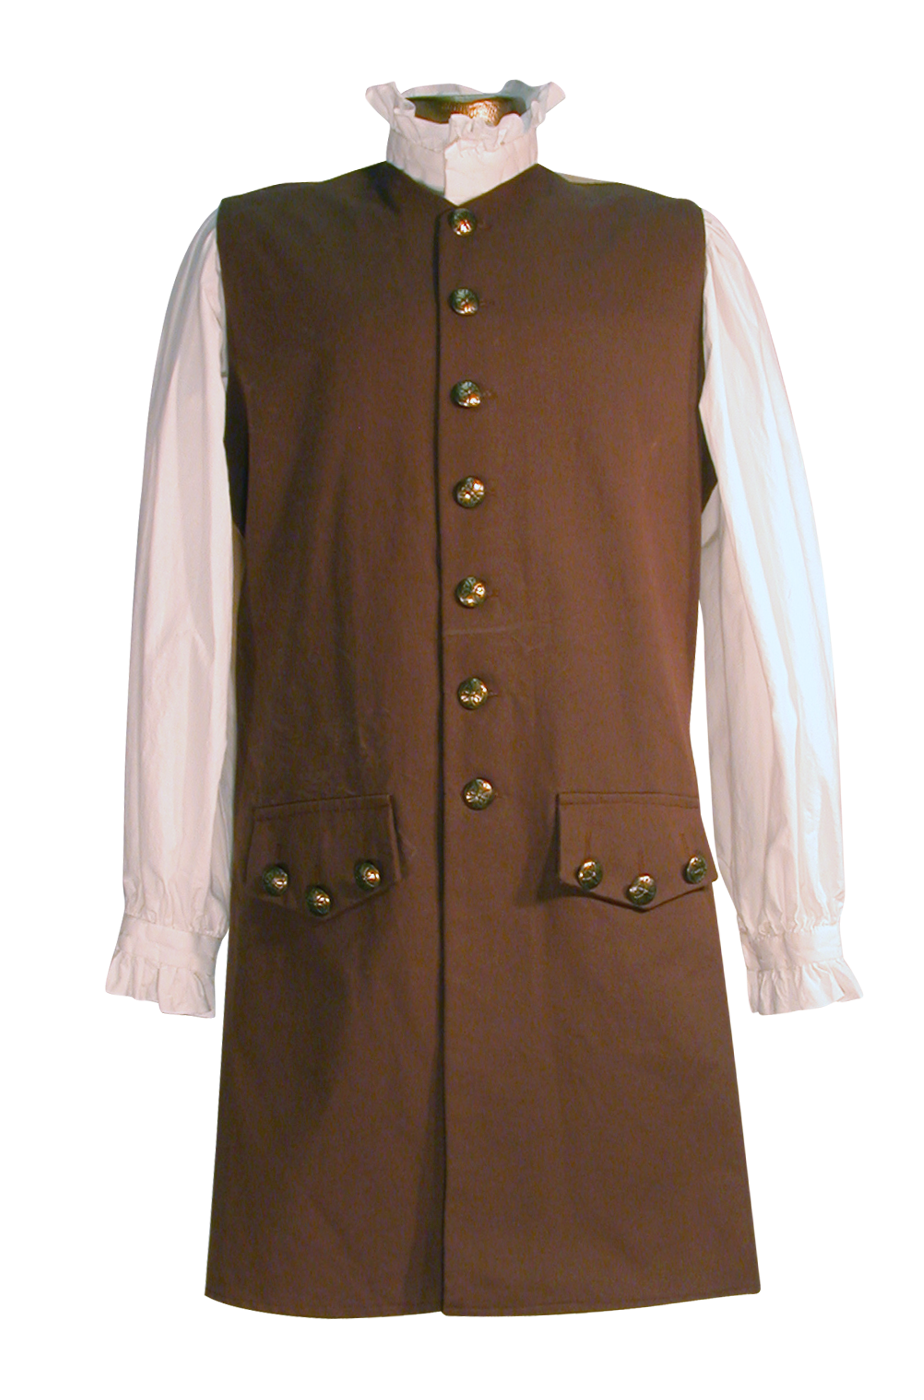 18th century waistcoat from White Pavilion, front view. This is ideal for pirates, colonials, 17th and 18th century costumes, and Revolutionary War and French and Indian War reenactors.